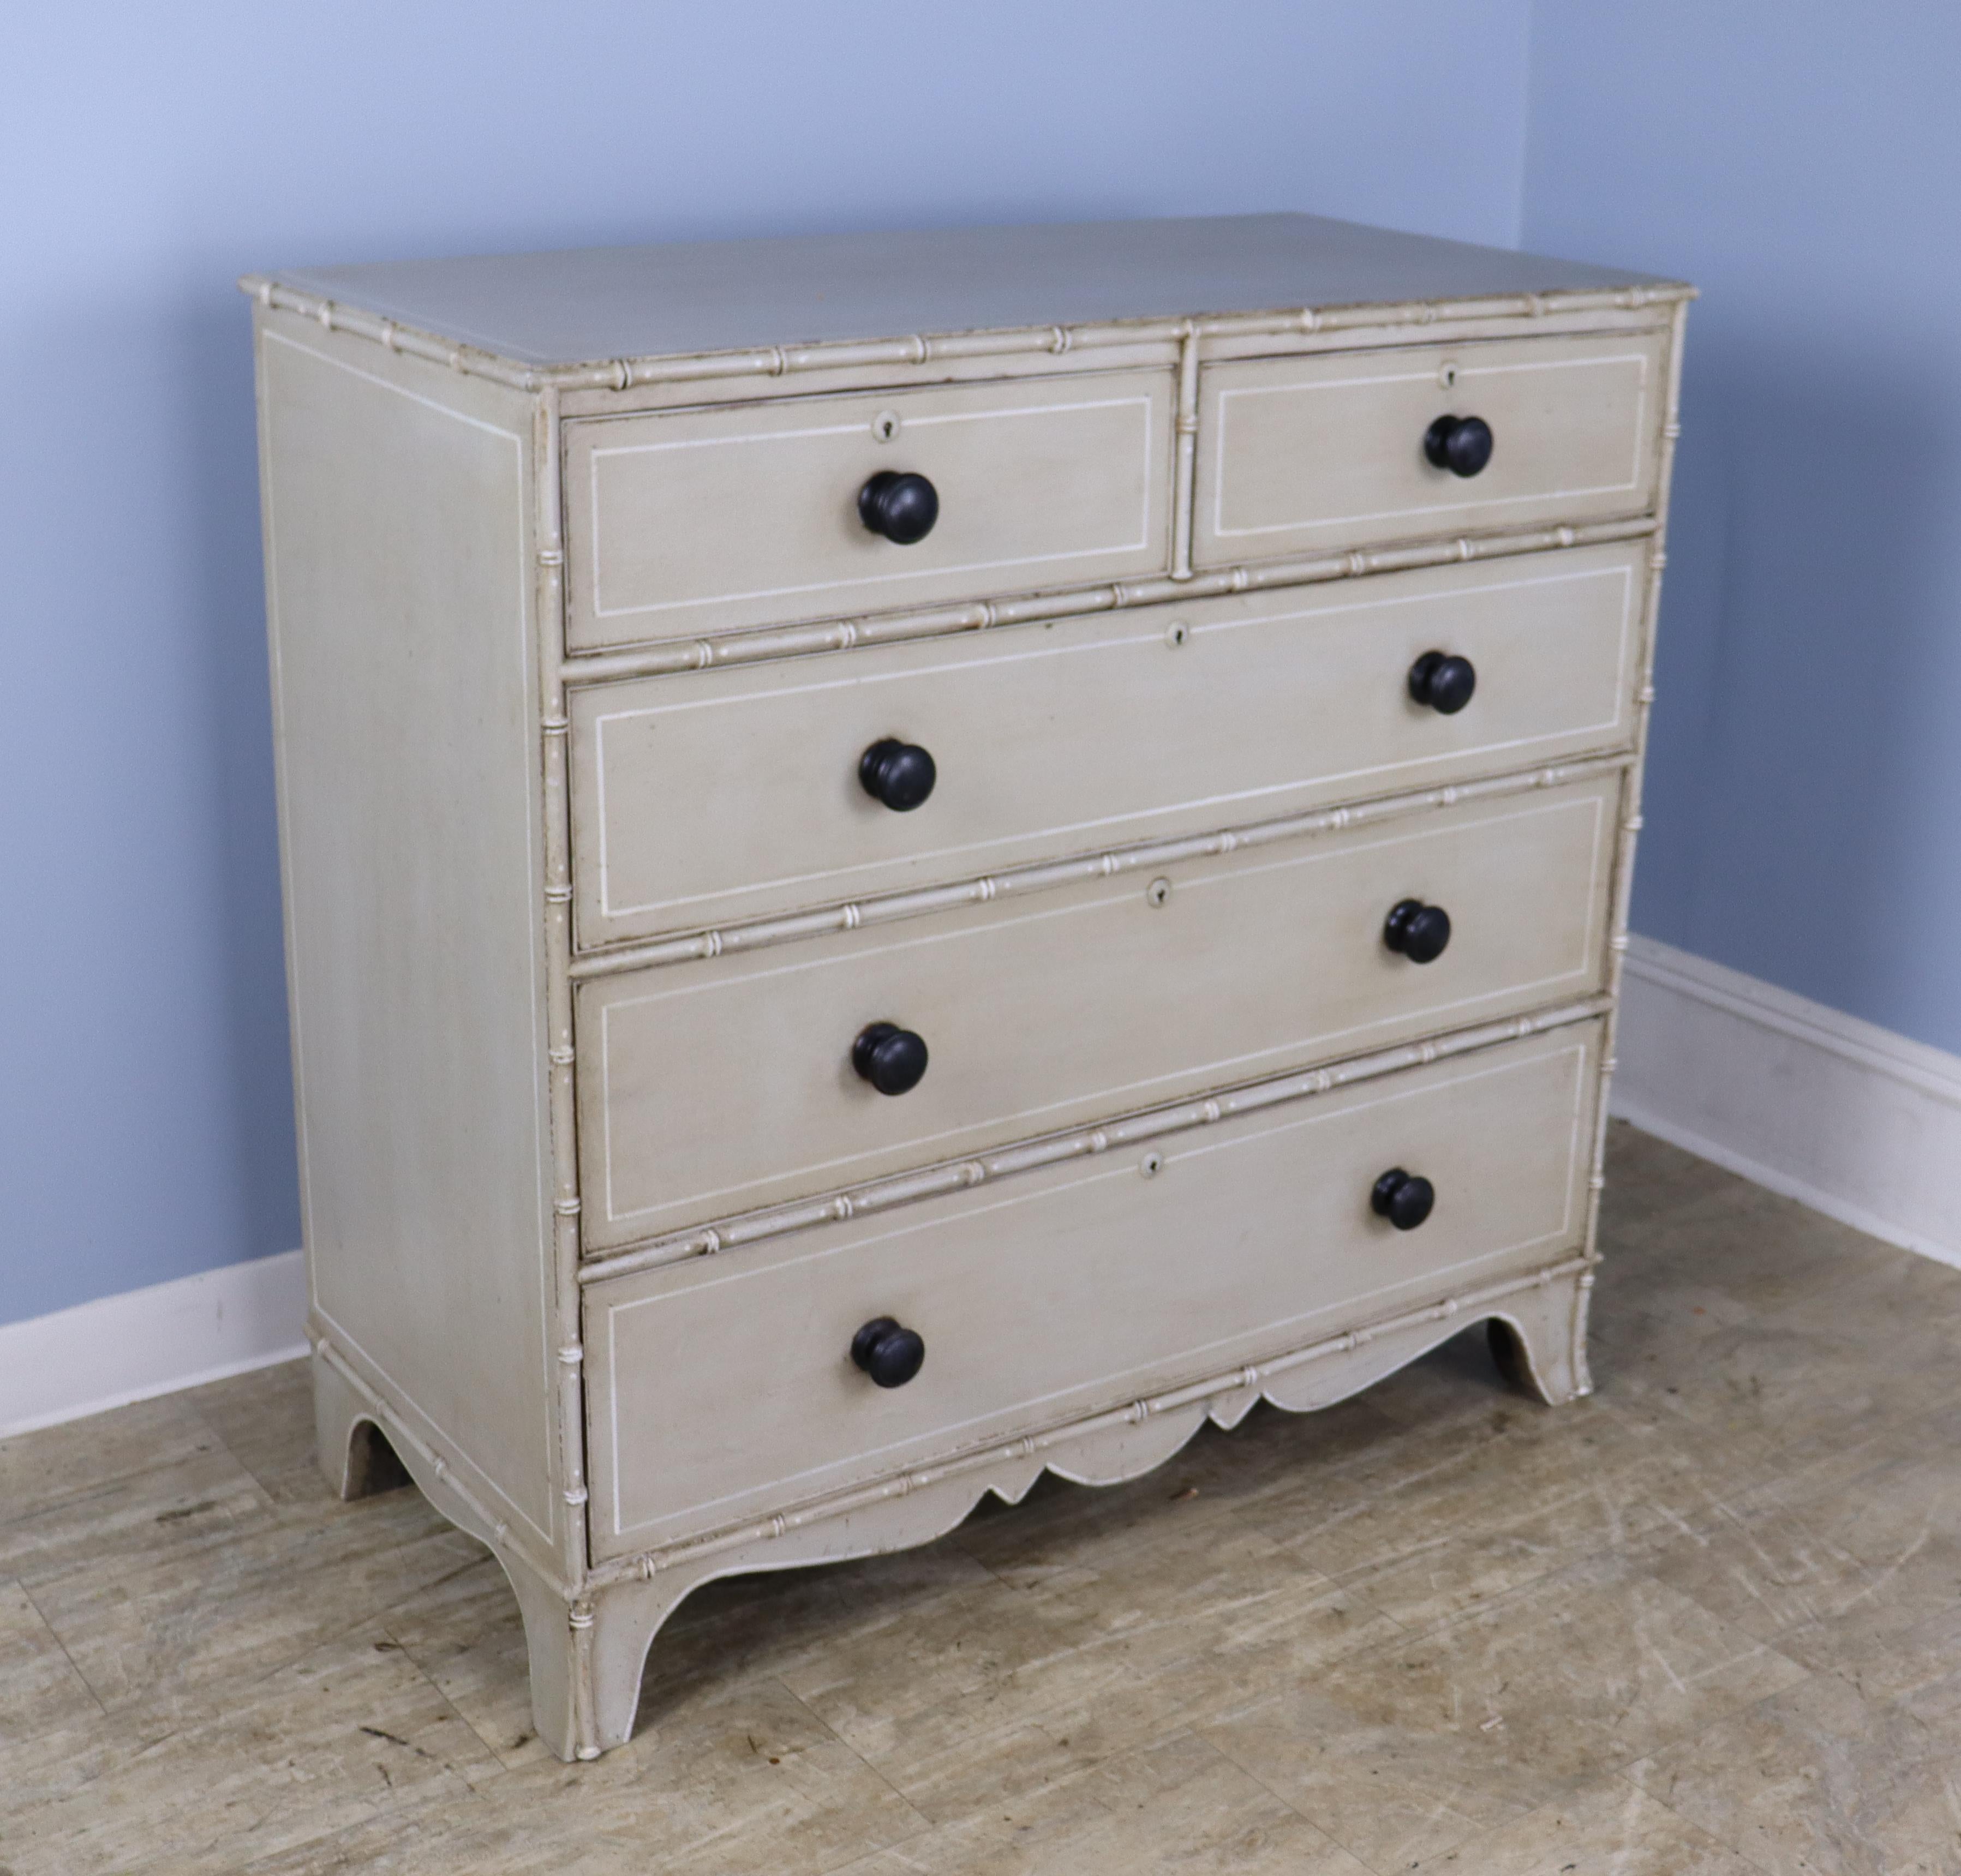 A charming Regency chest of drawers with bamboo detail, newly painted in an antique light gray, finished with beeswax to create a faux distressed effect. Perfectly suited to a beach cottage, child's room or guest room. Roomy drawers open and shut